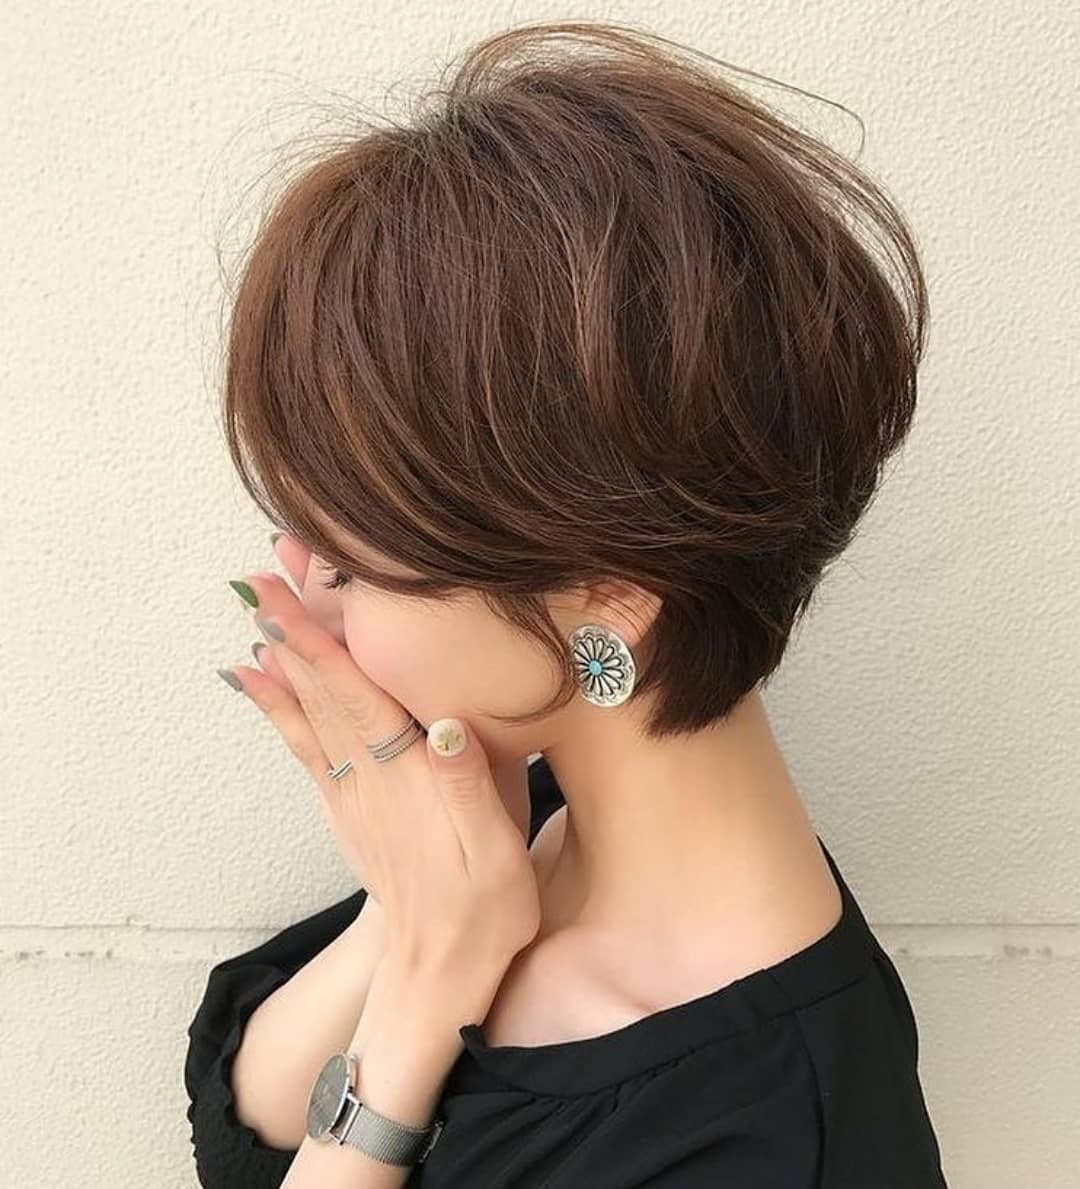 Short Hairstyles For Young Girls
 10 Cute Short Hairstyles and Haircuts for Young Girls